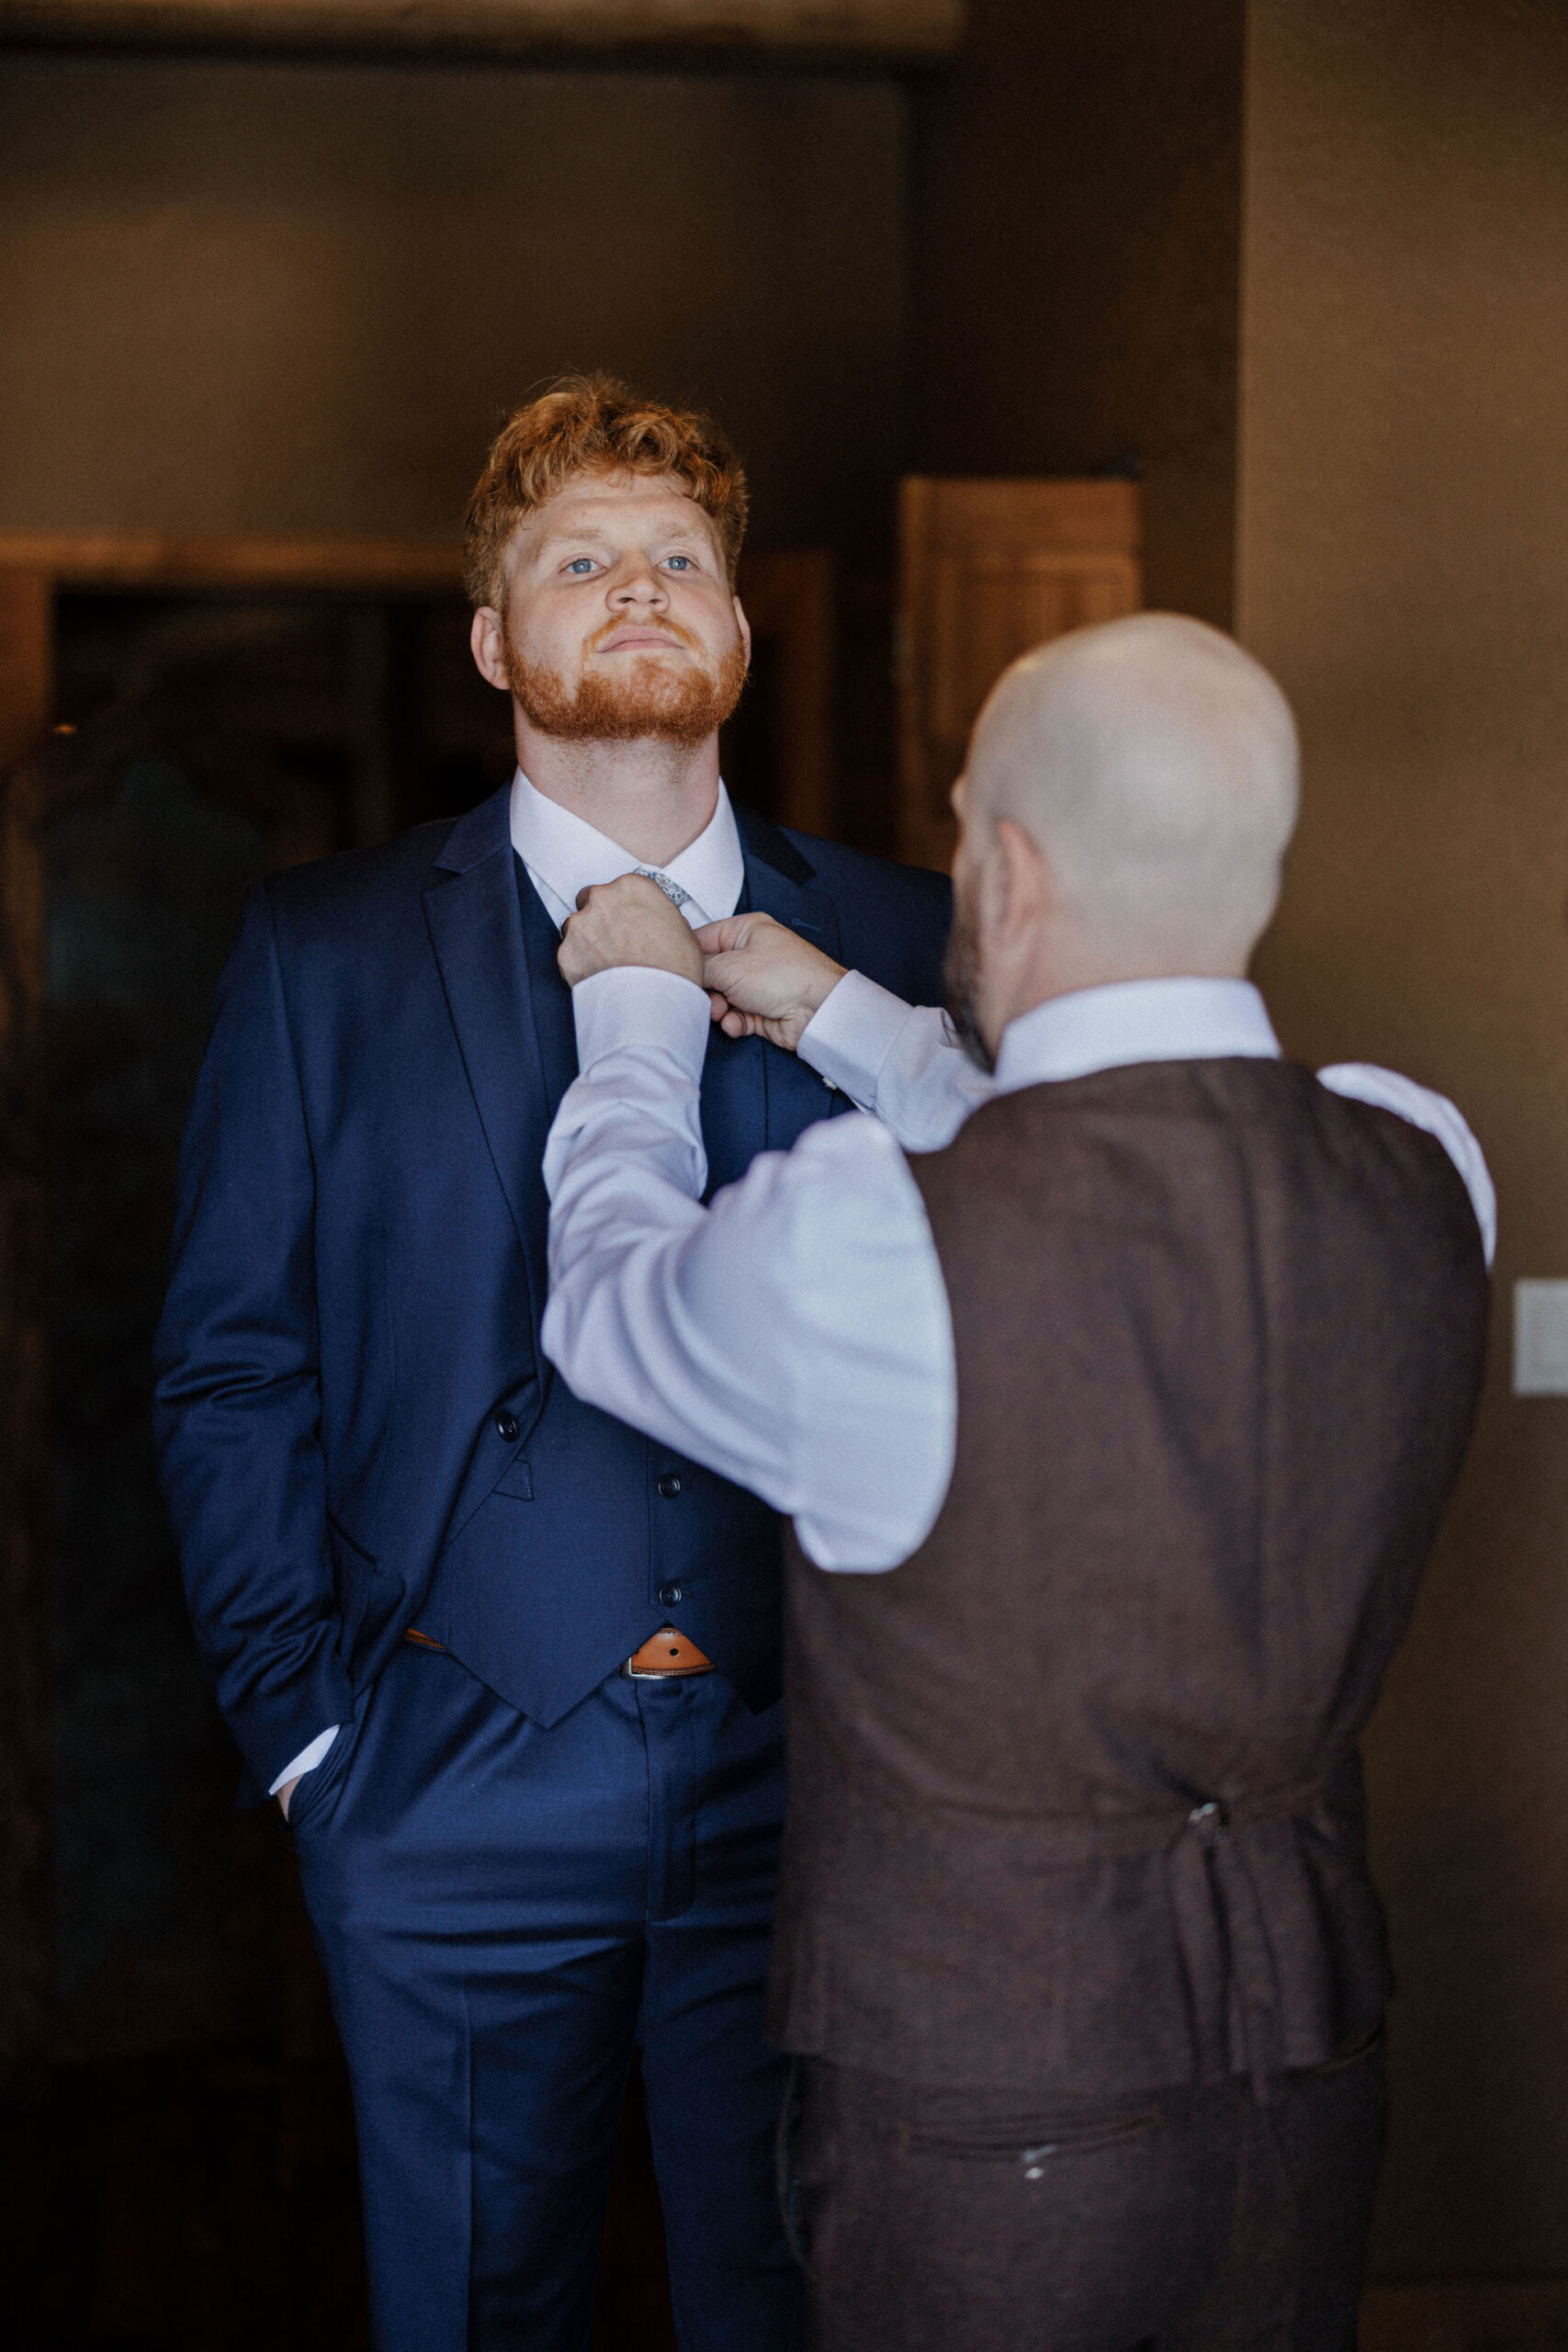 father of the bride helps groom put on tie in airbnb